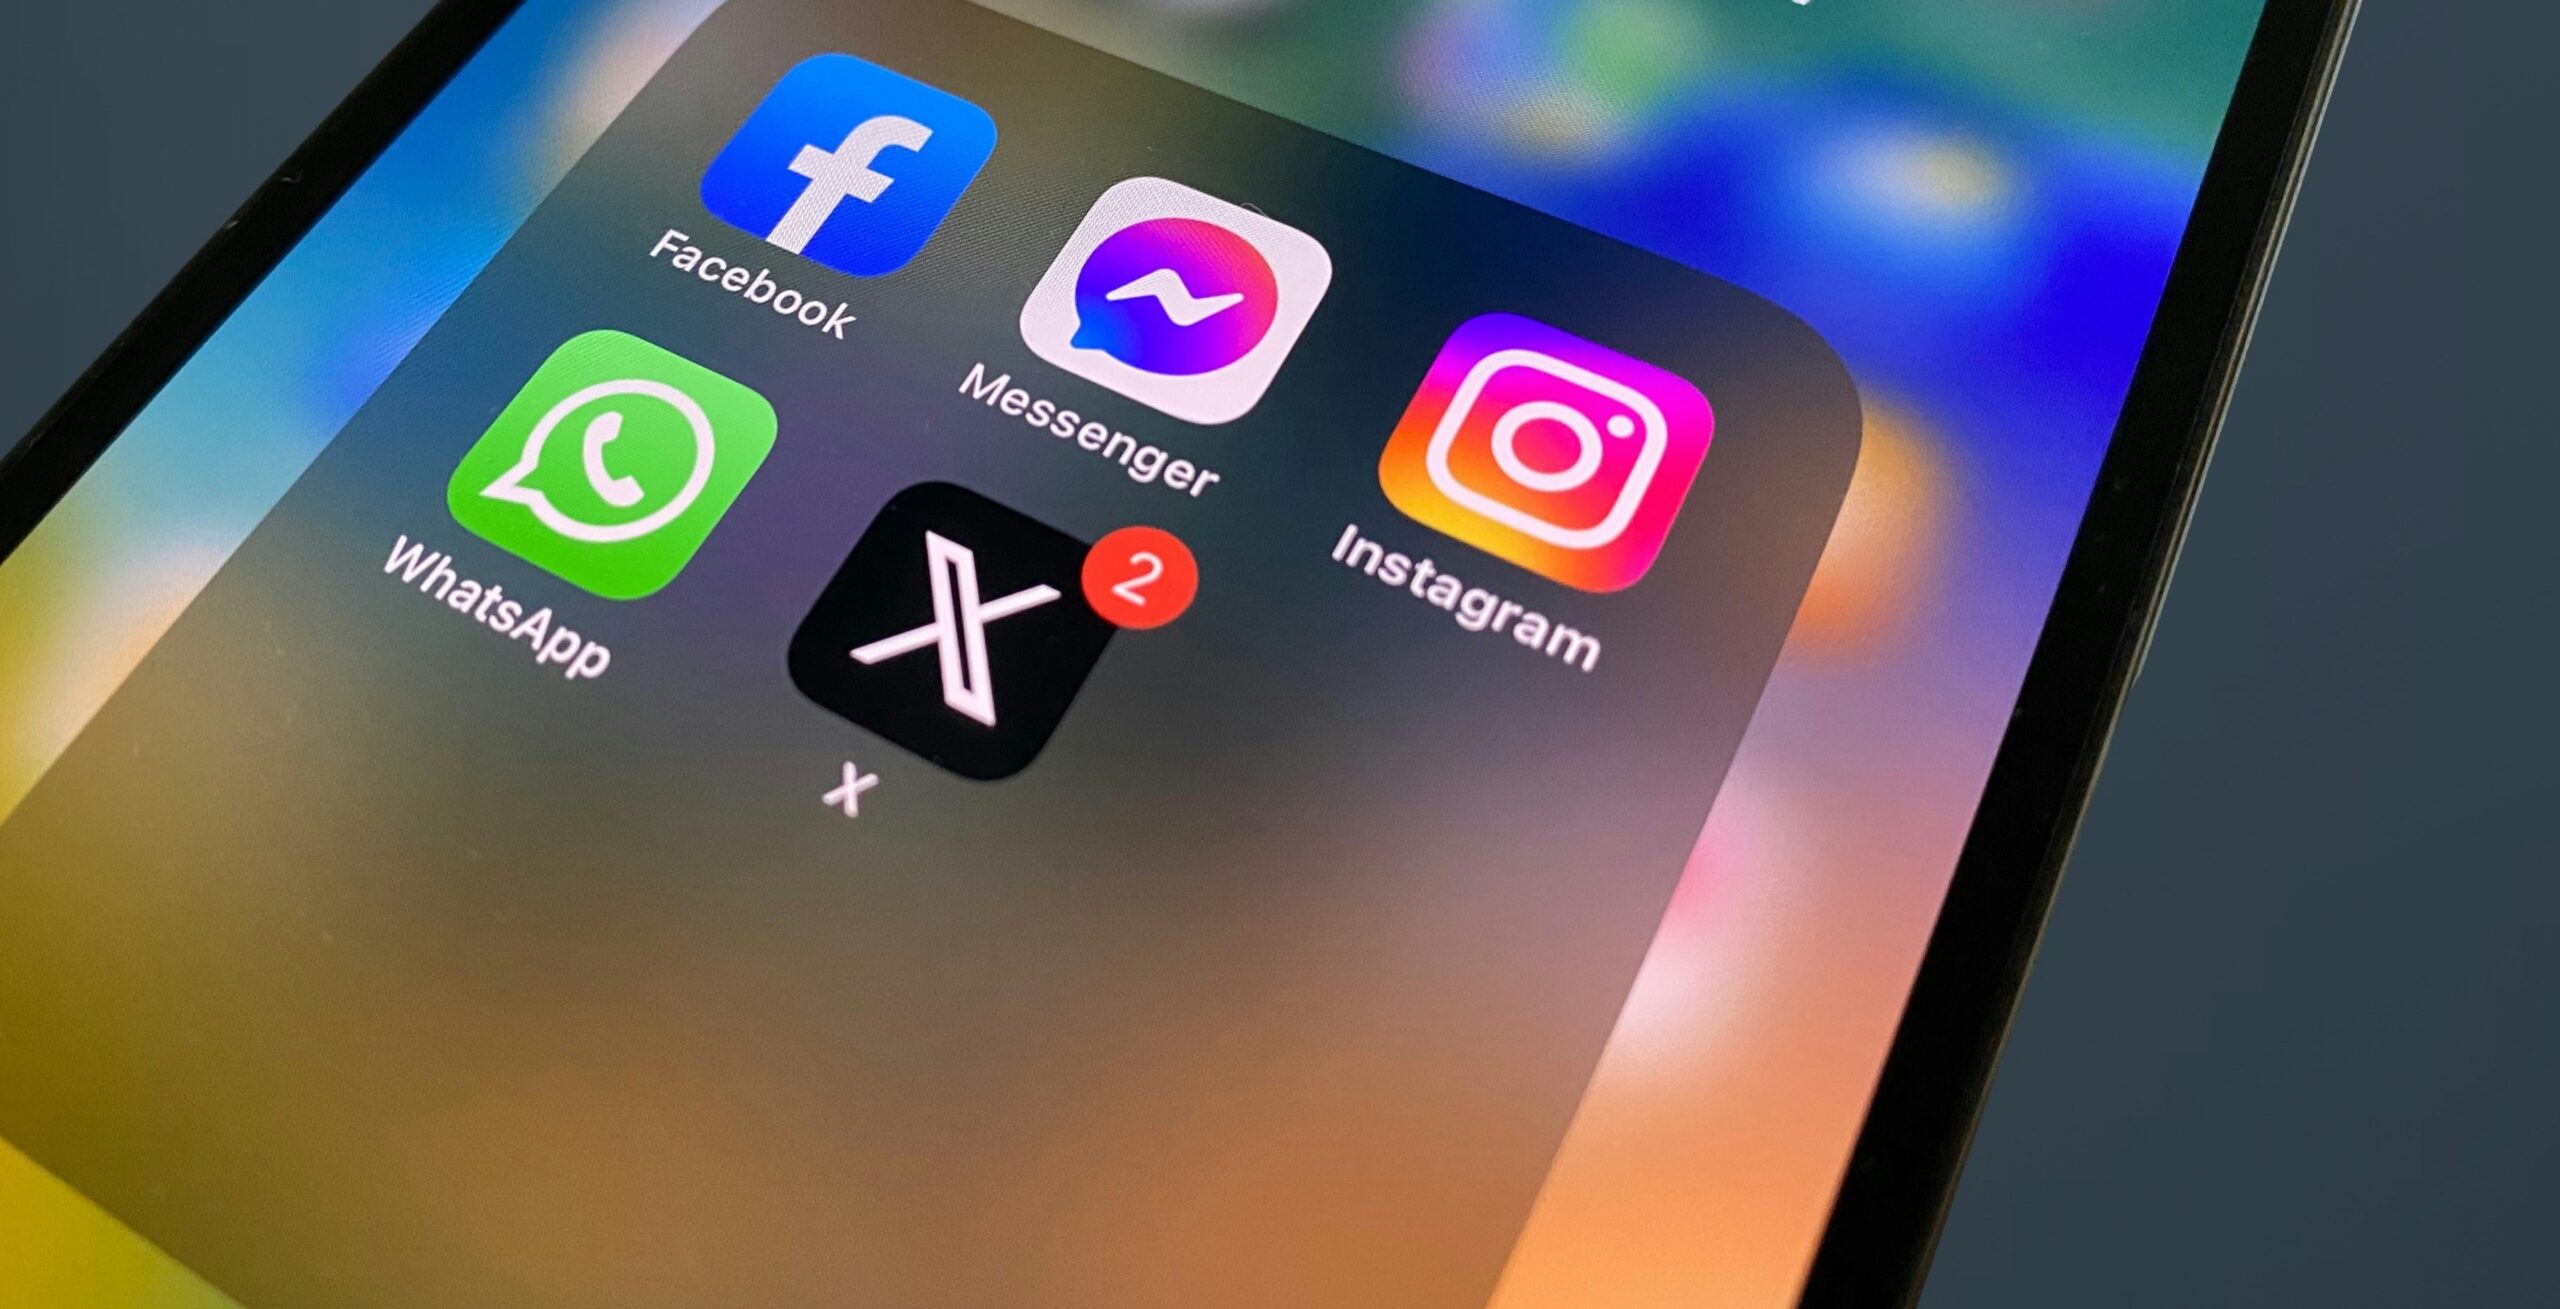 photo of an iphone with the facebook, messenger, instagram, whatsapp, and X icons